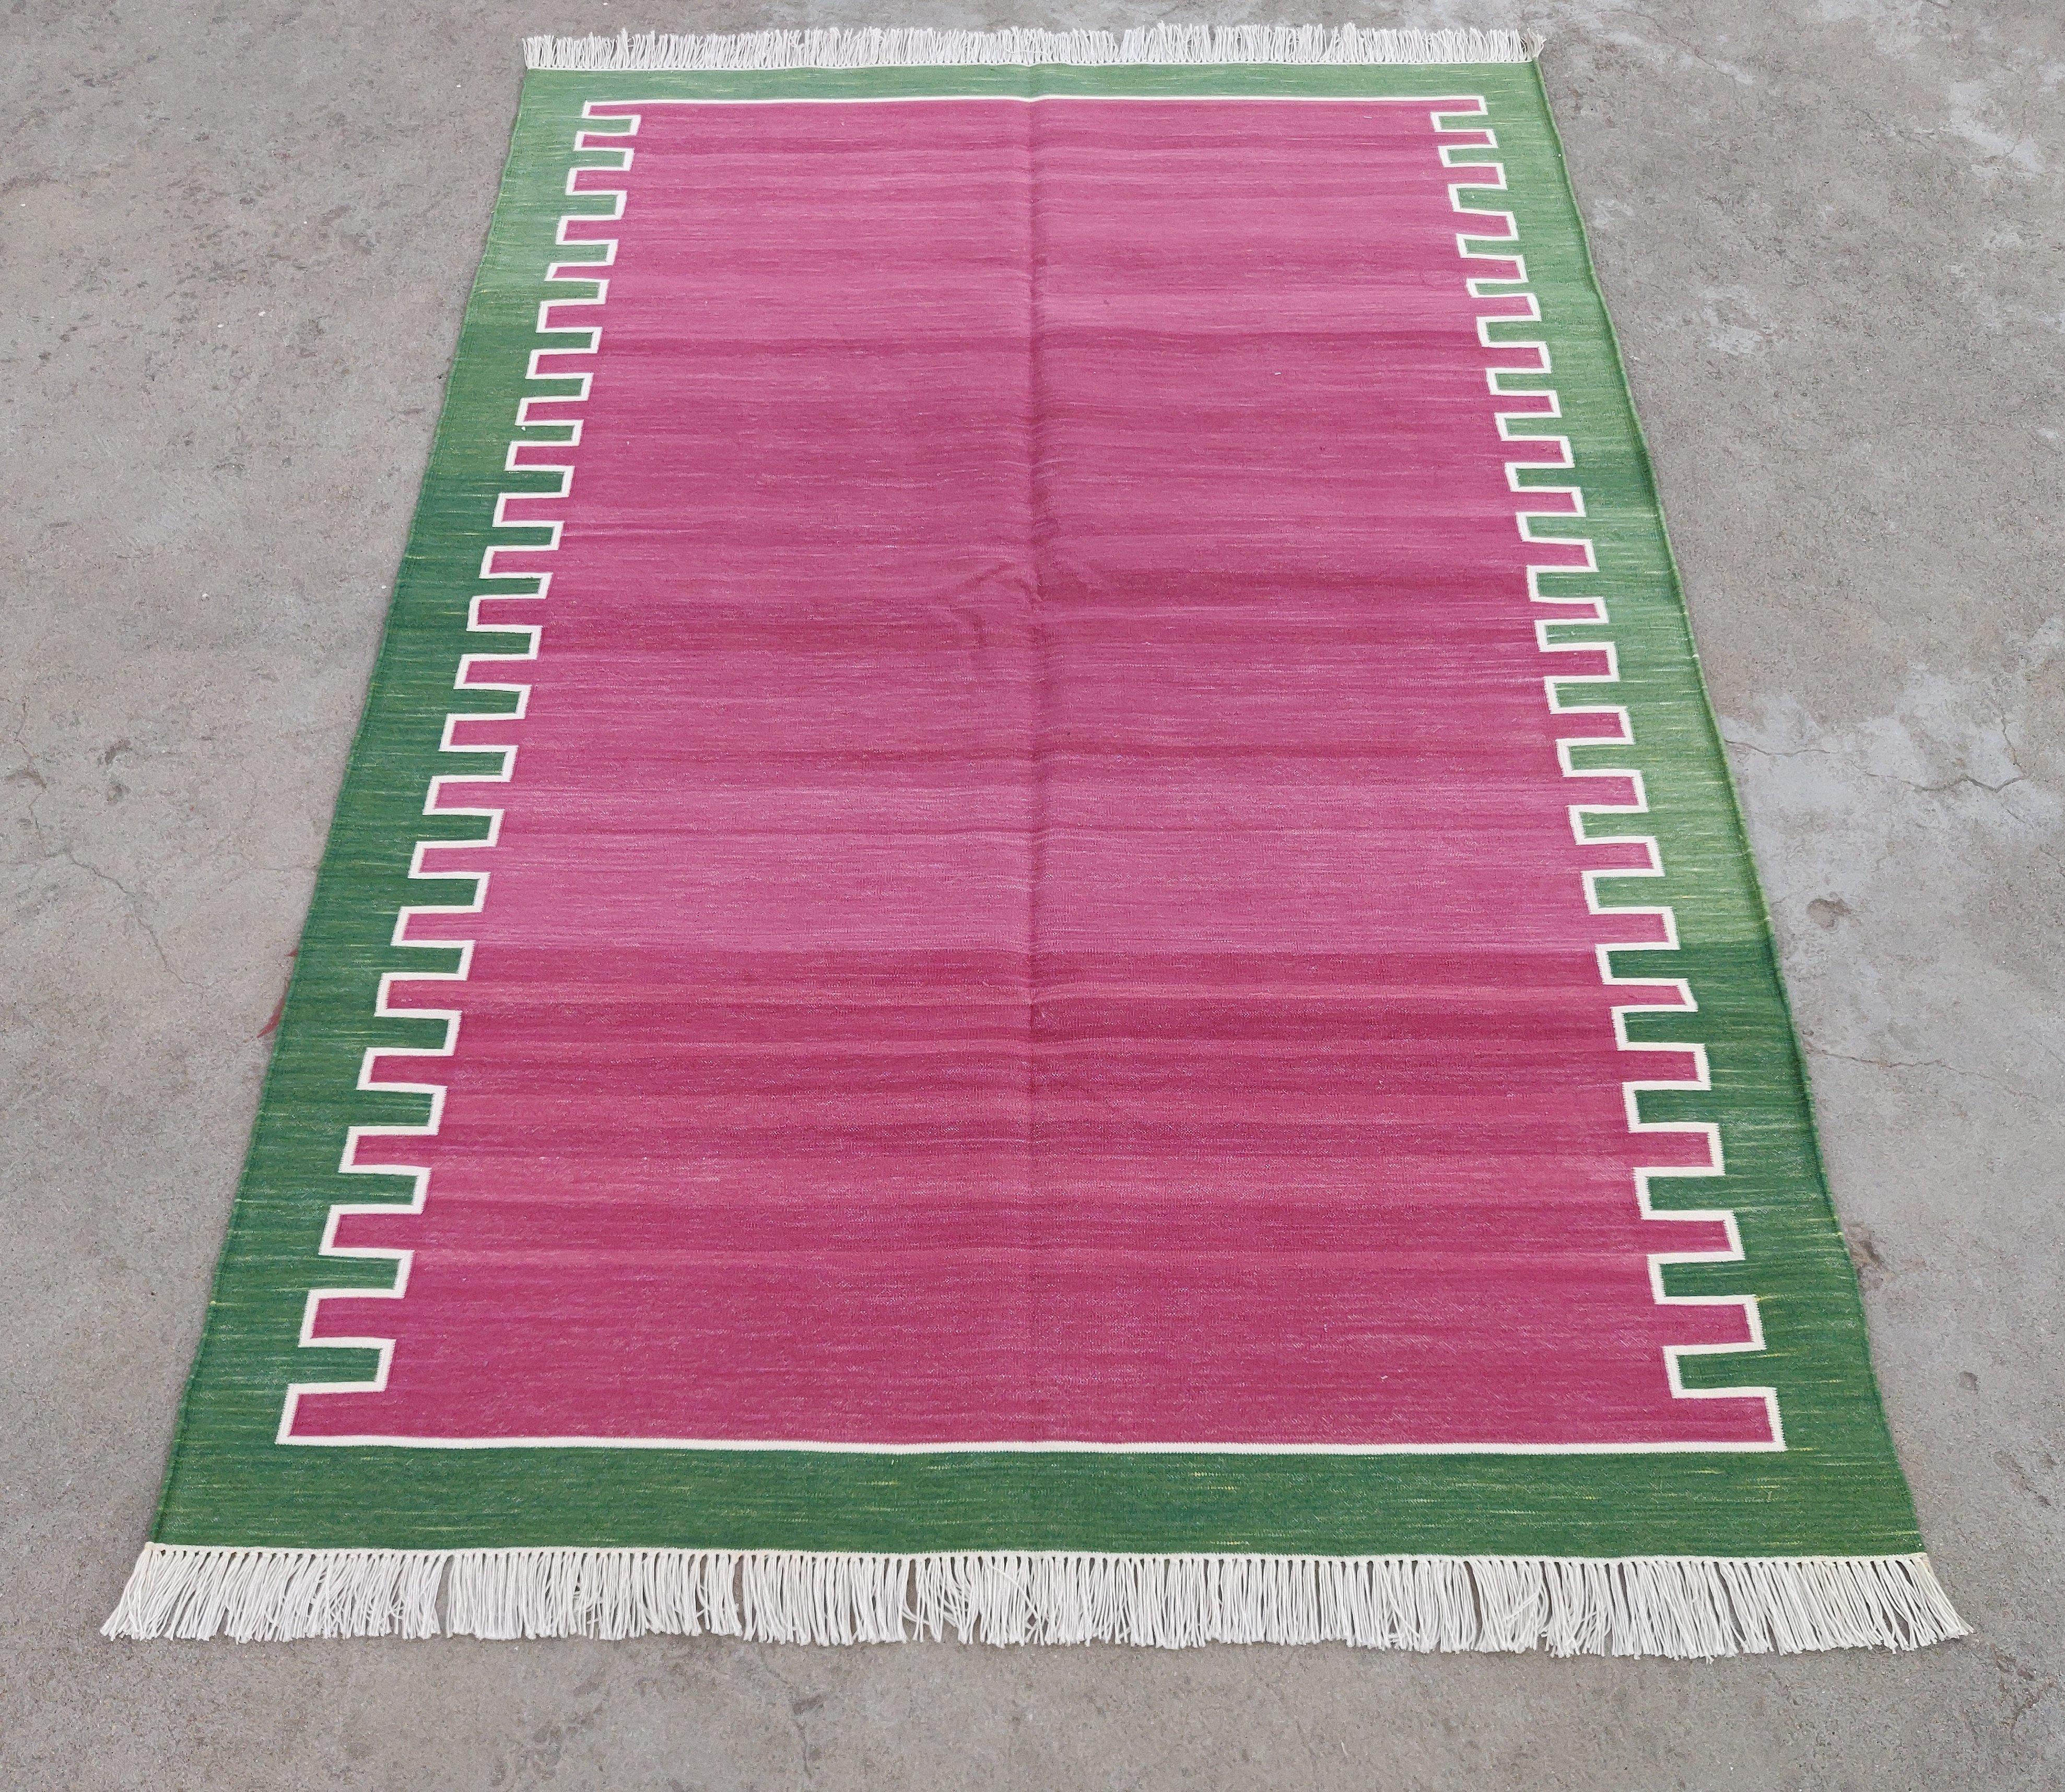 Hand-Woven Handmade Cotton Area Flat Weave Rug, 4x6 Pink And Green Striped Indian Dhurrie For Sale